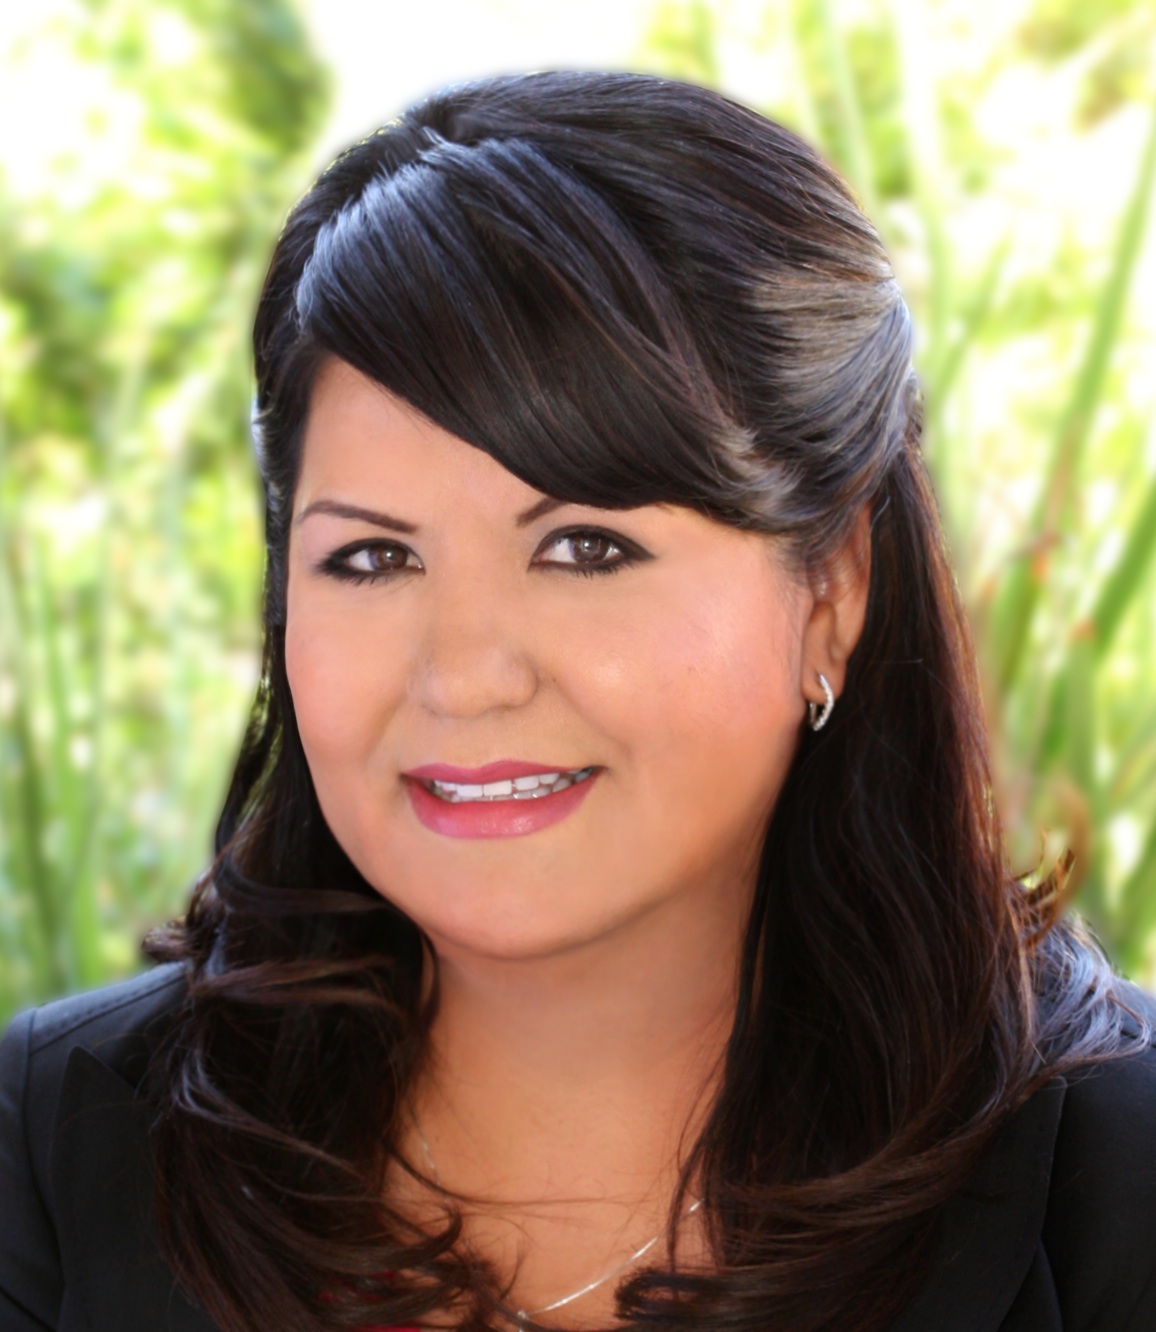 Gabriela Cárdenas is the new general manager for KPDF-41, the Azteca América affiliate in Phoenix. The station is owned by the Una Vez Mas group (UVM). - gabriela_cardenas